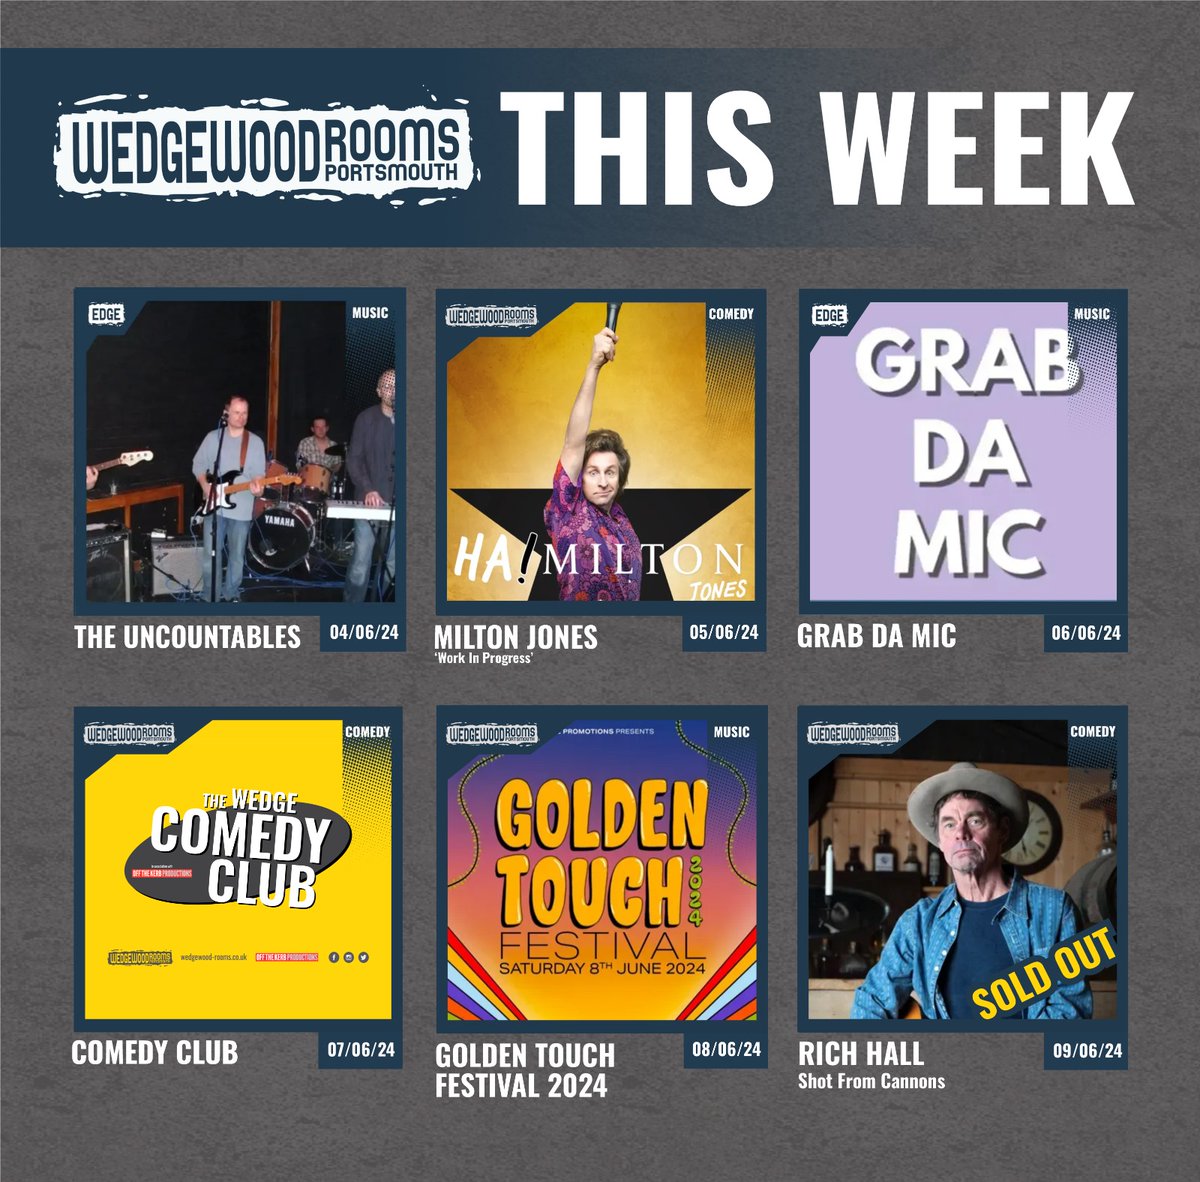 This week at the Wedge!😍 The Uncountables w/ The Elephant Cage @themiltonjones: Ha!Milton Grab Da Mic Comedy Club @goldentouchfest featuring @vistasmusic, @harveyjdodgson, @IndoorPets, @weredirtyblonde Rich Hall: Shot From Cannons 👉 wedgewood-rooms.co.uk 👈